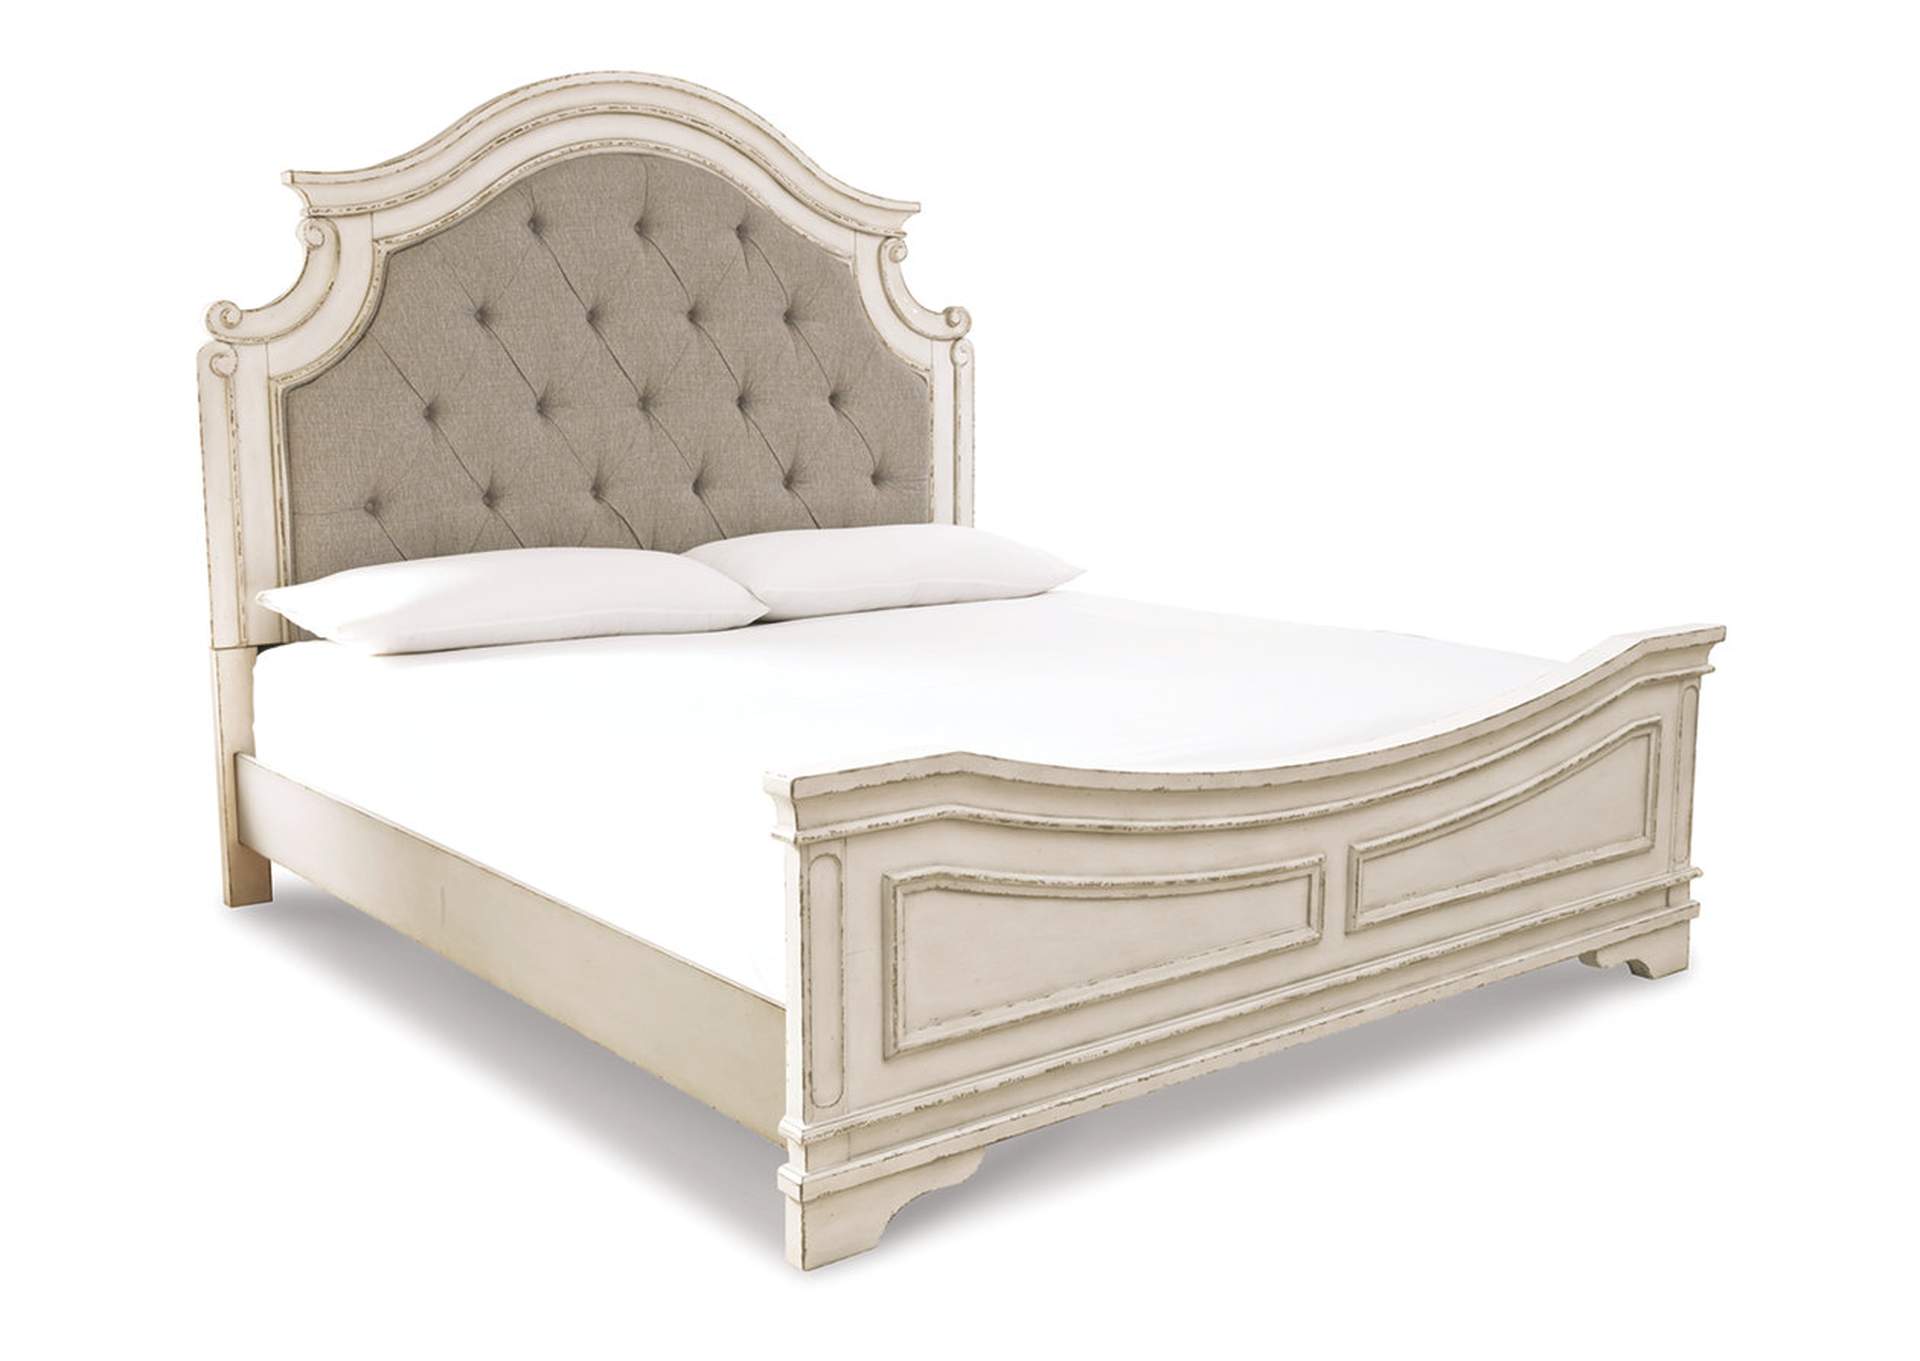 Realyn Queen Upholstered Panel Bed,Signature Design By Ashley